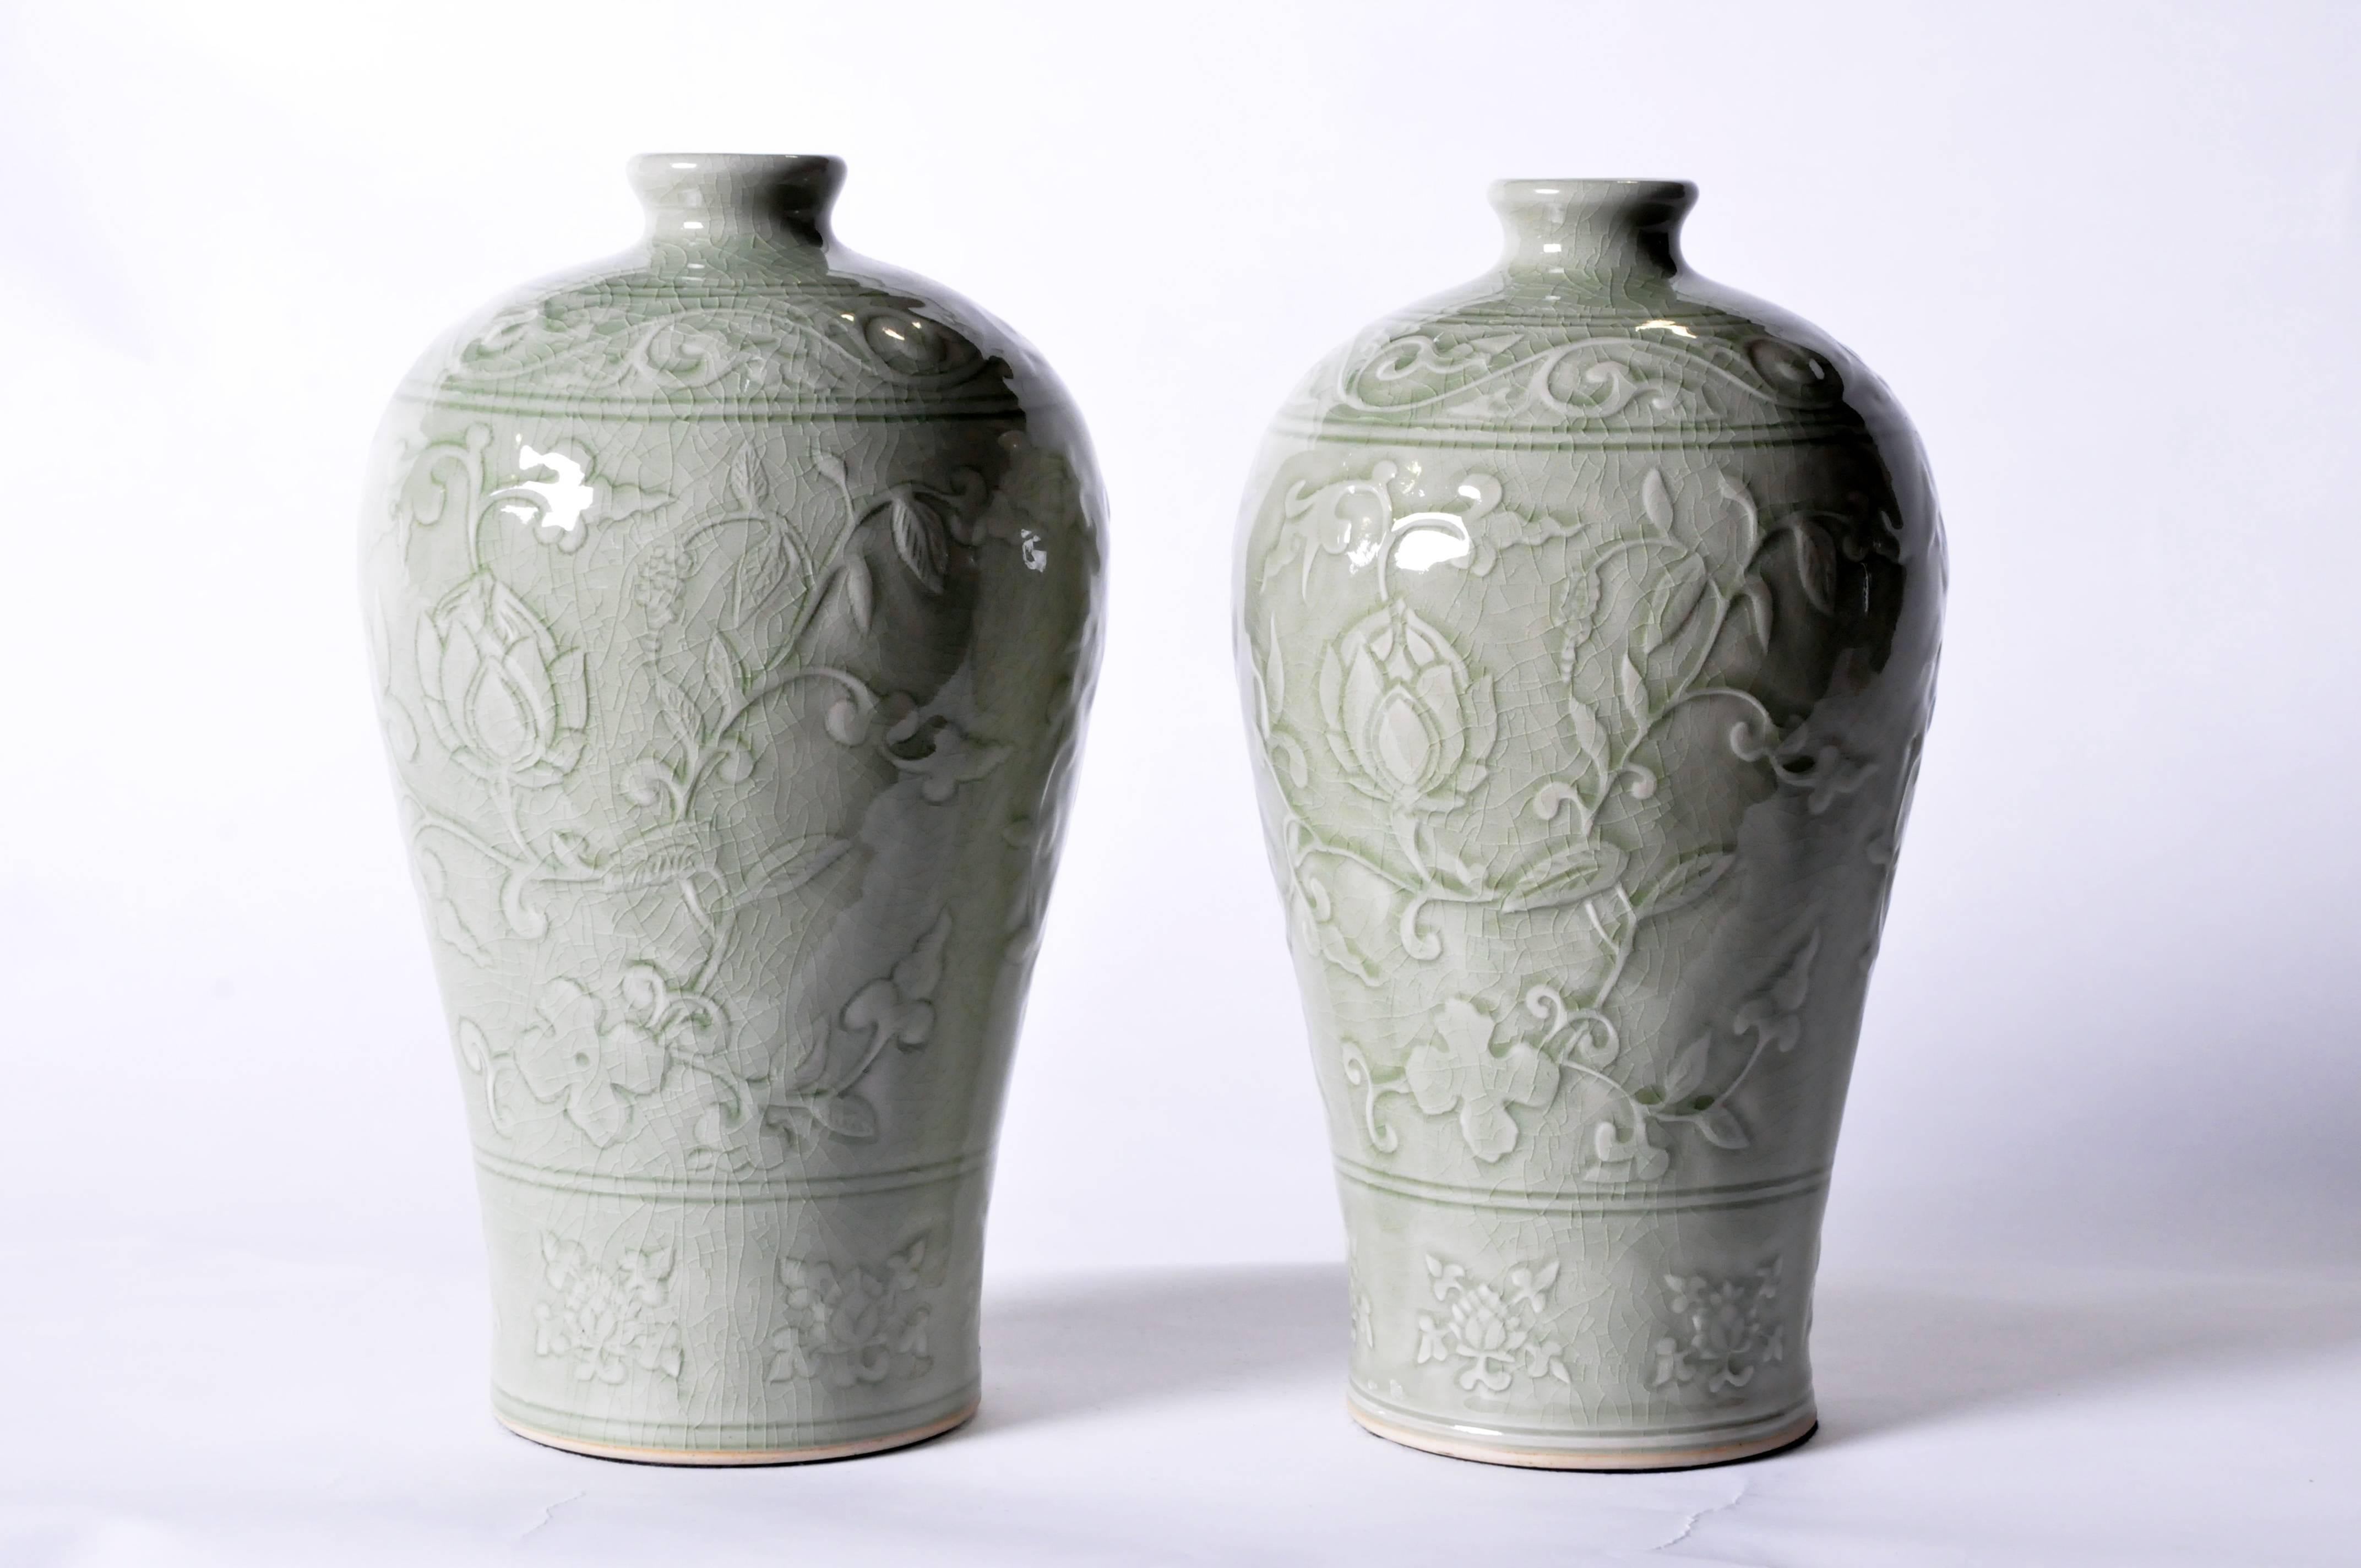 This charming handmade vessel features an allover carved lotus scroll decoration under the high-gloss crackle glaze. Shown in a pair for comparison and styling; each is sold separately.